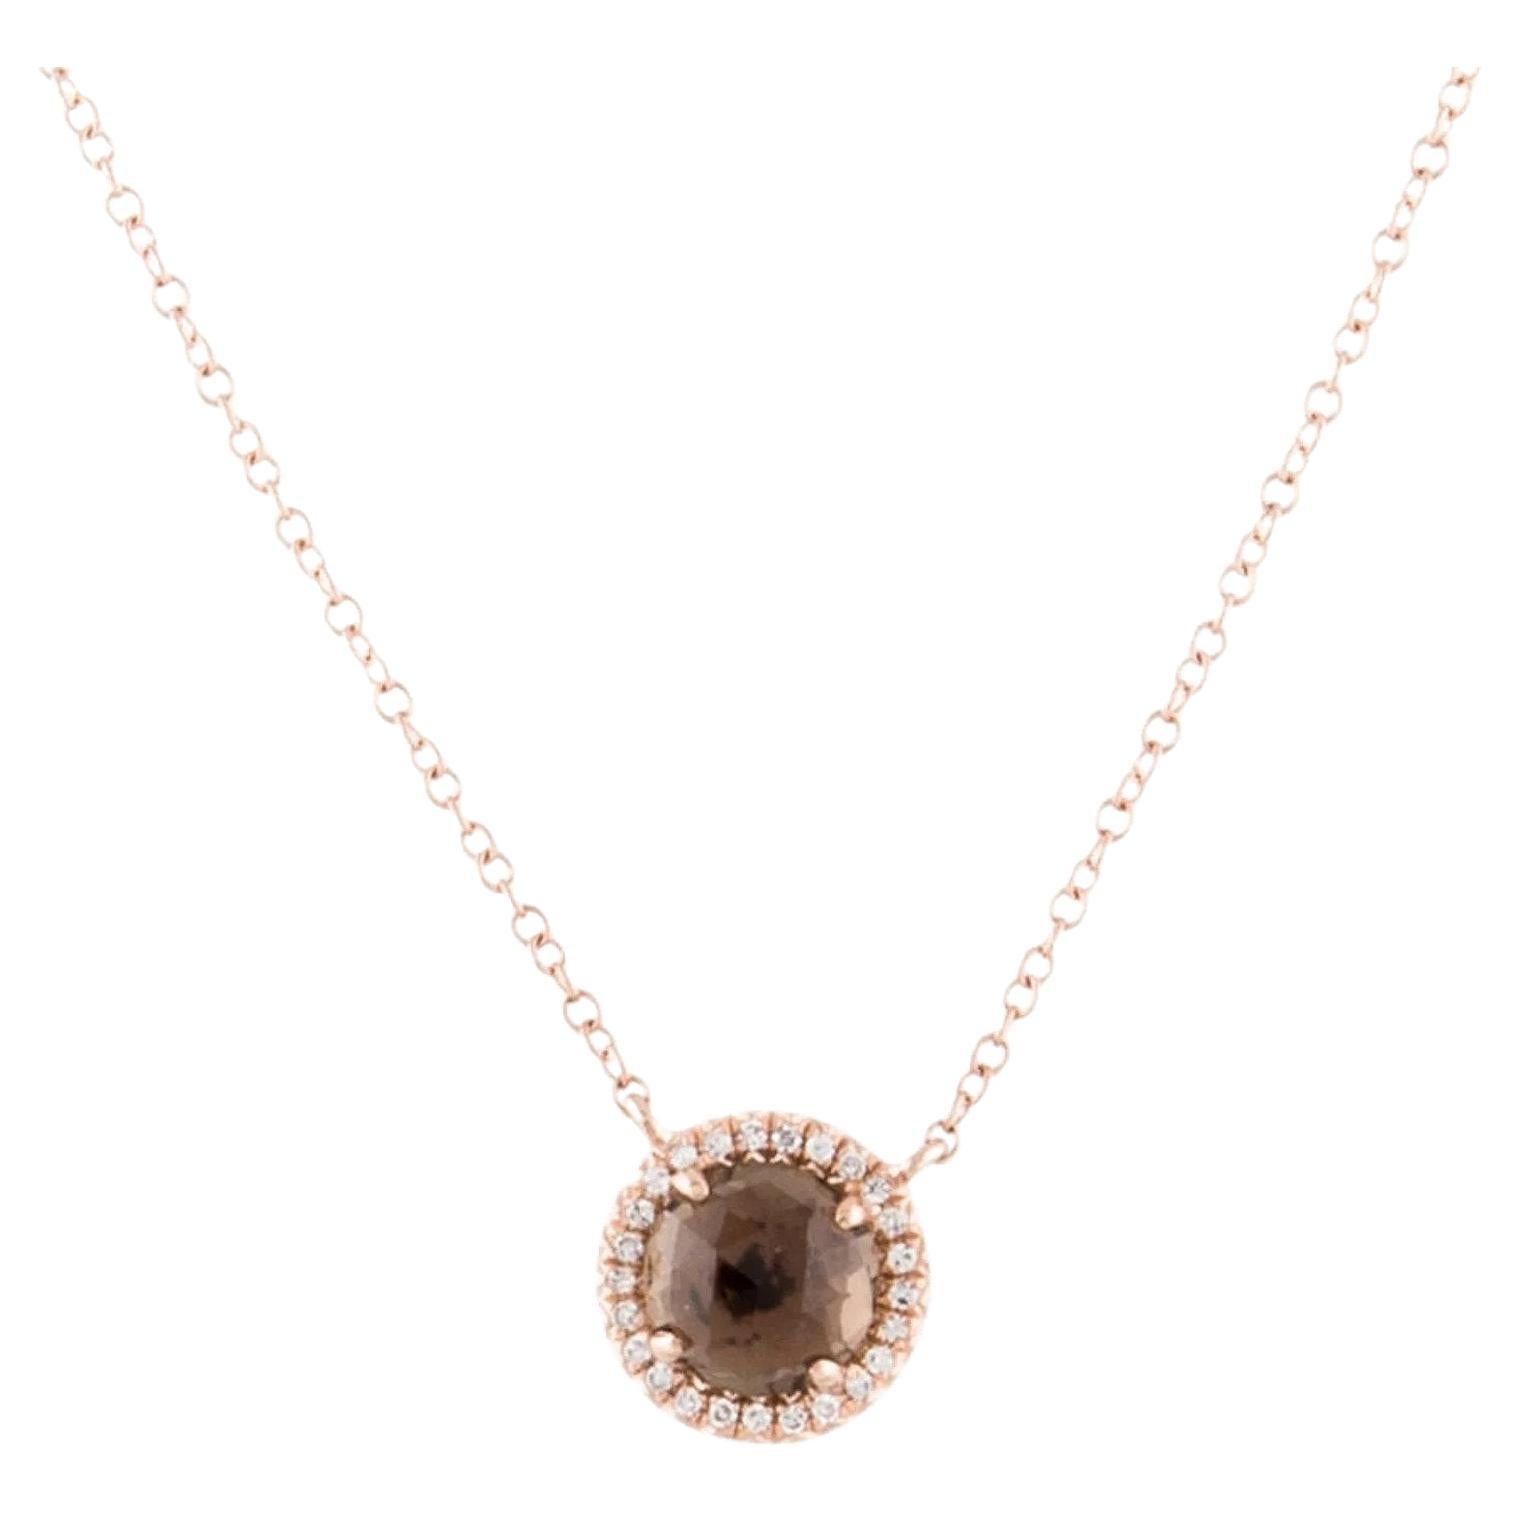 This Smoky Quartz & Diamond Pendant is a stunning and timeless accessory that can add a touch of glamour and sophistication to any outfit. 

This pendant features a 1.15 Carat Round Smoky Quartz, with a Diamond Halo comprised of 0.06 Carats of